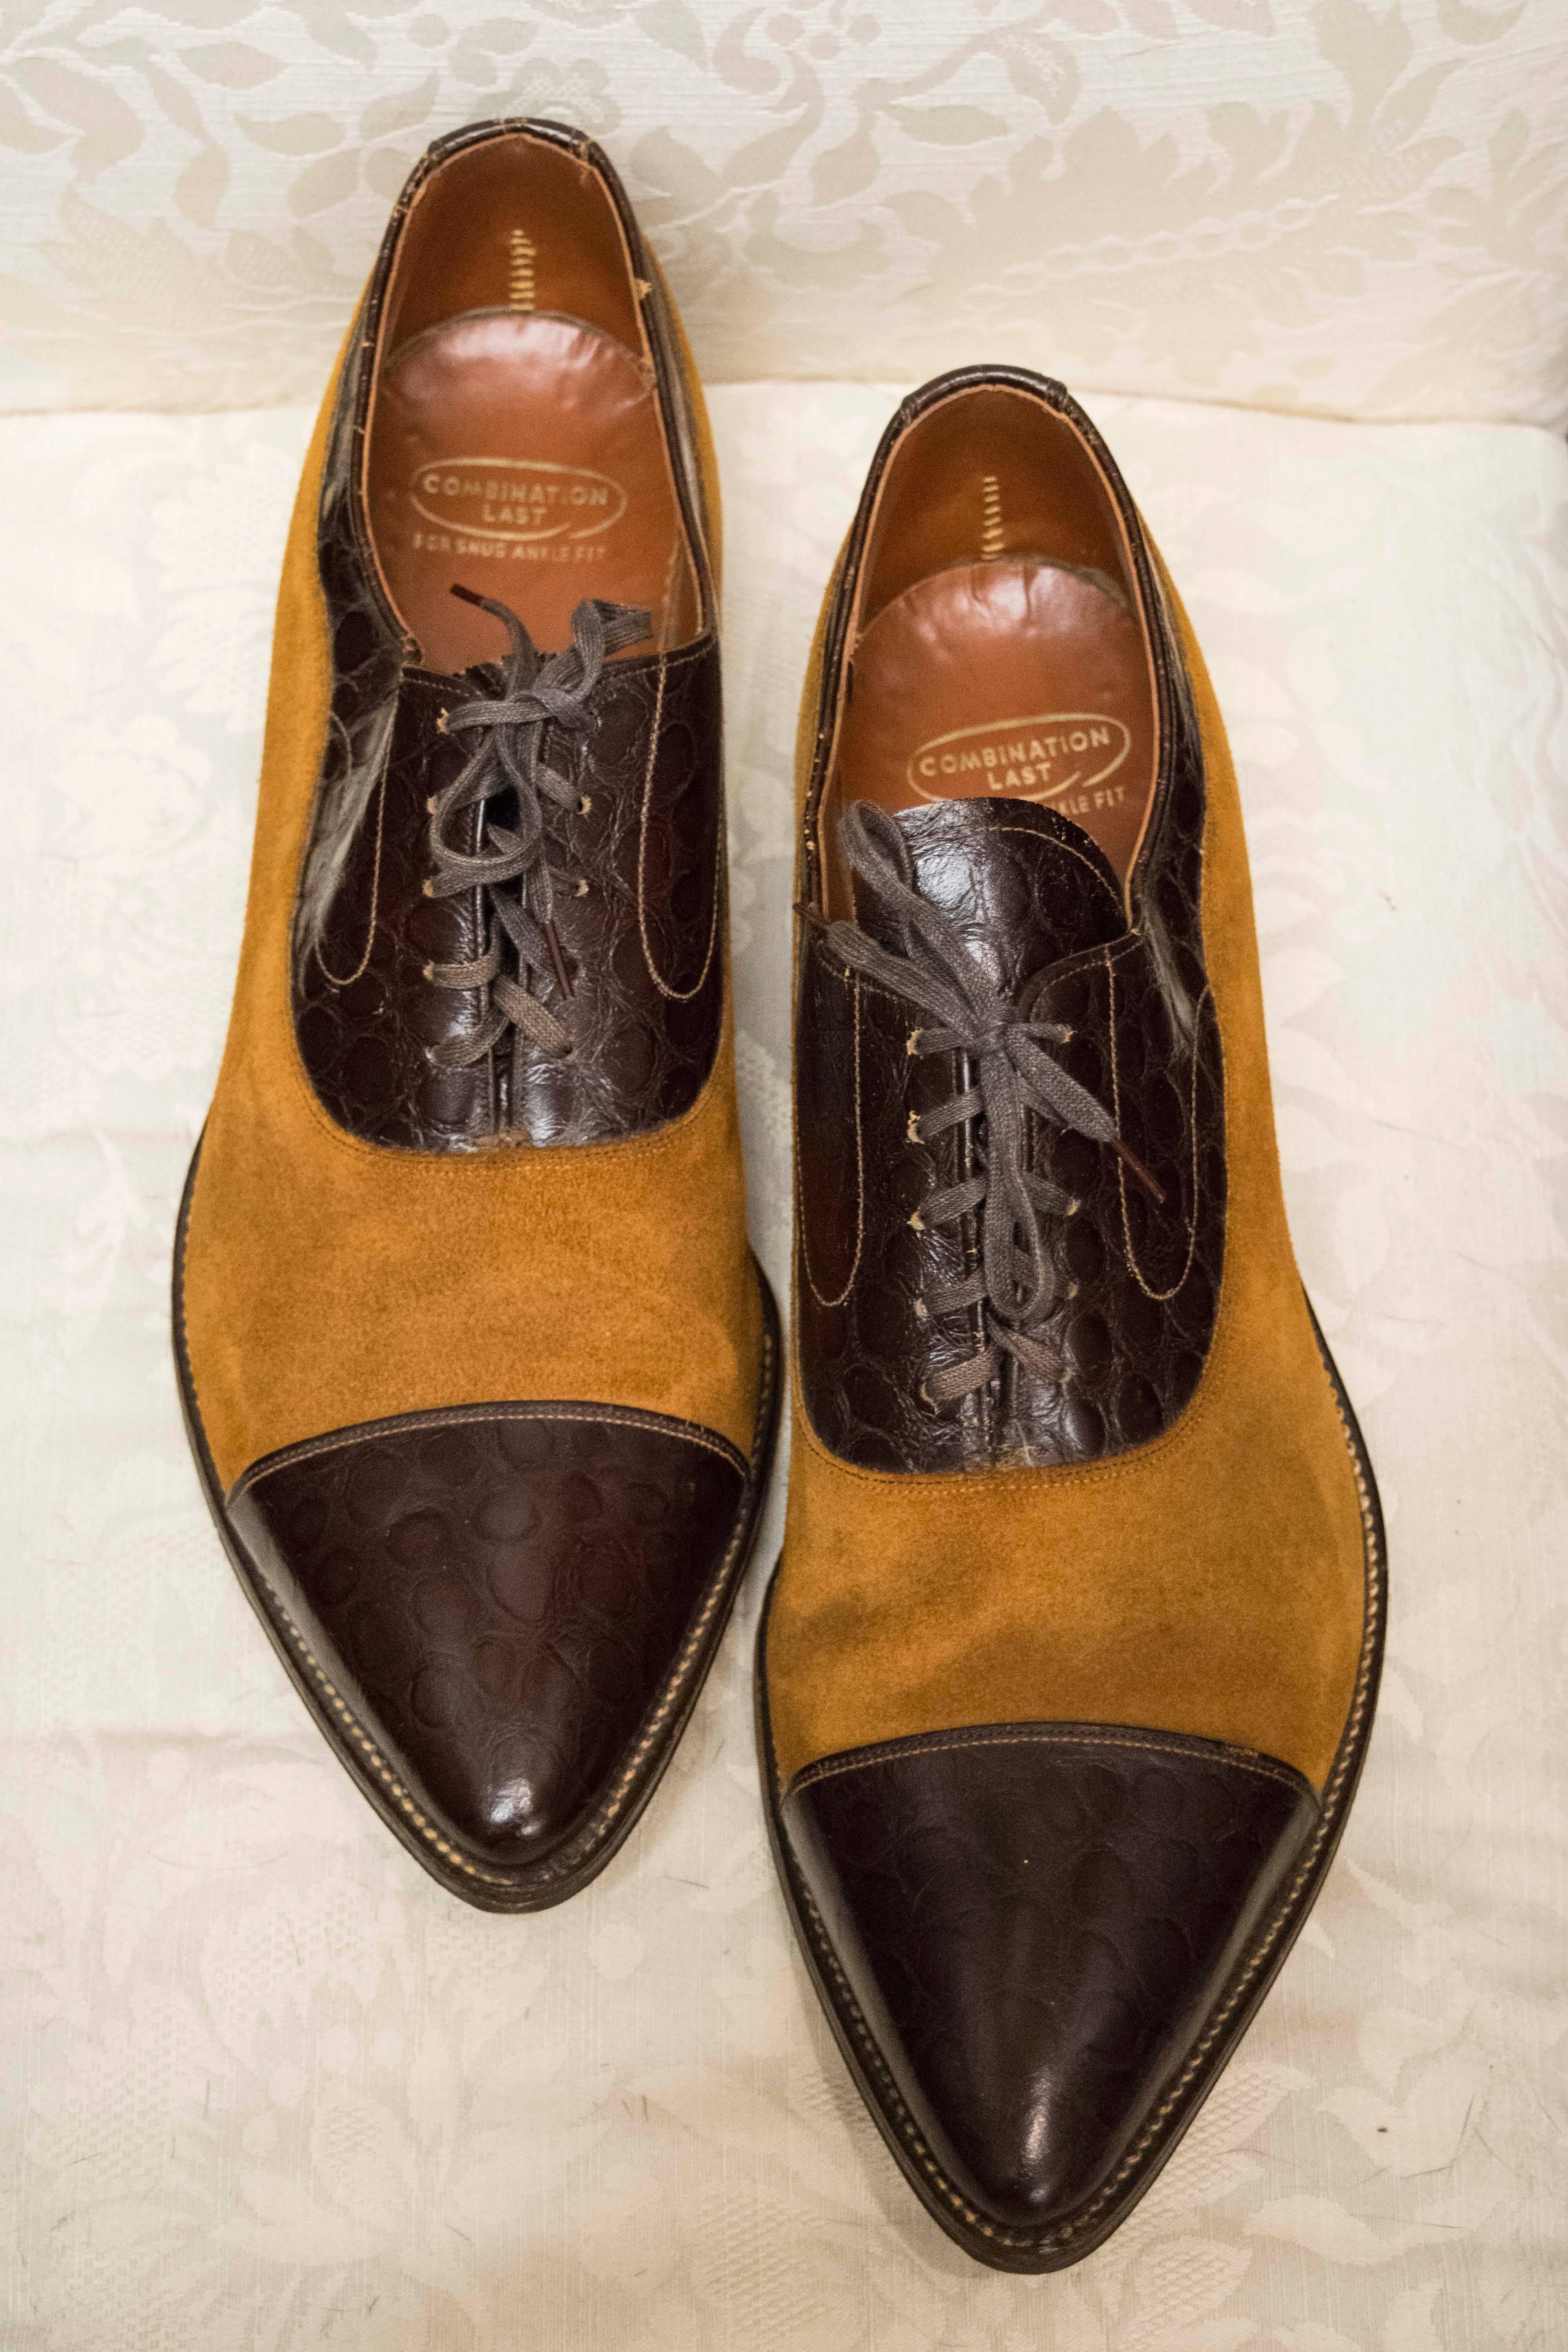 1970s Mens Suede and Leather Shoes

Stunning mens suede shoes circa 1970, with faux Alligator detailing. 

Size 12